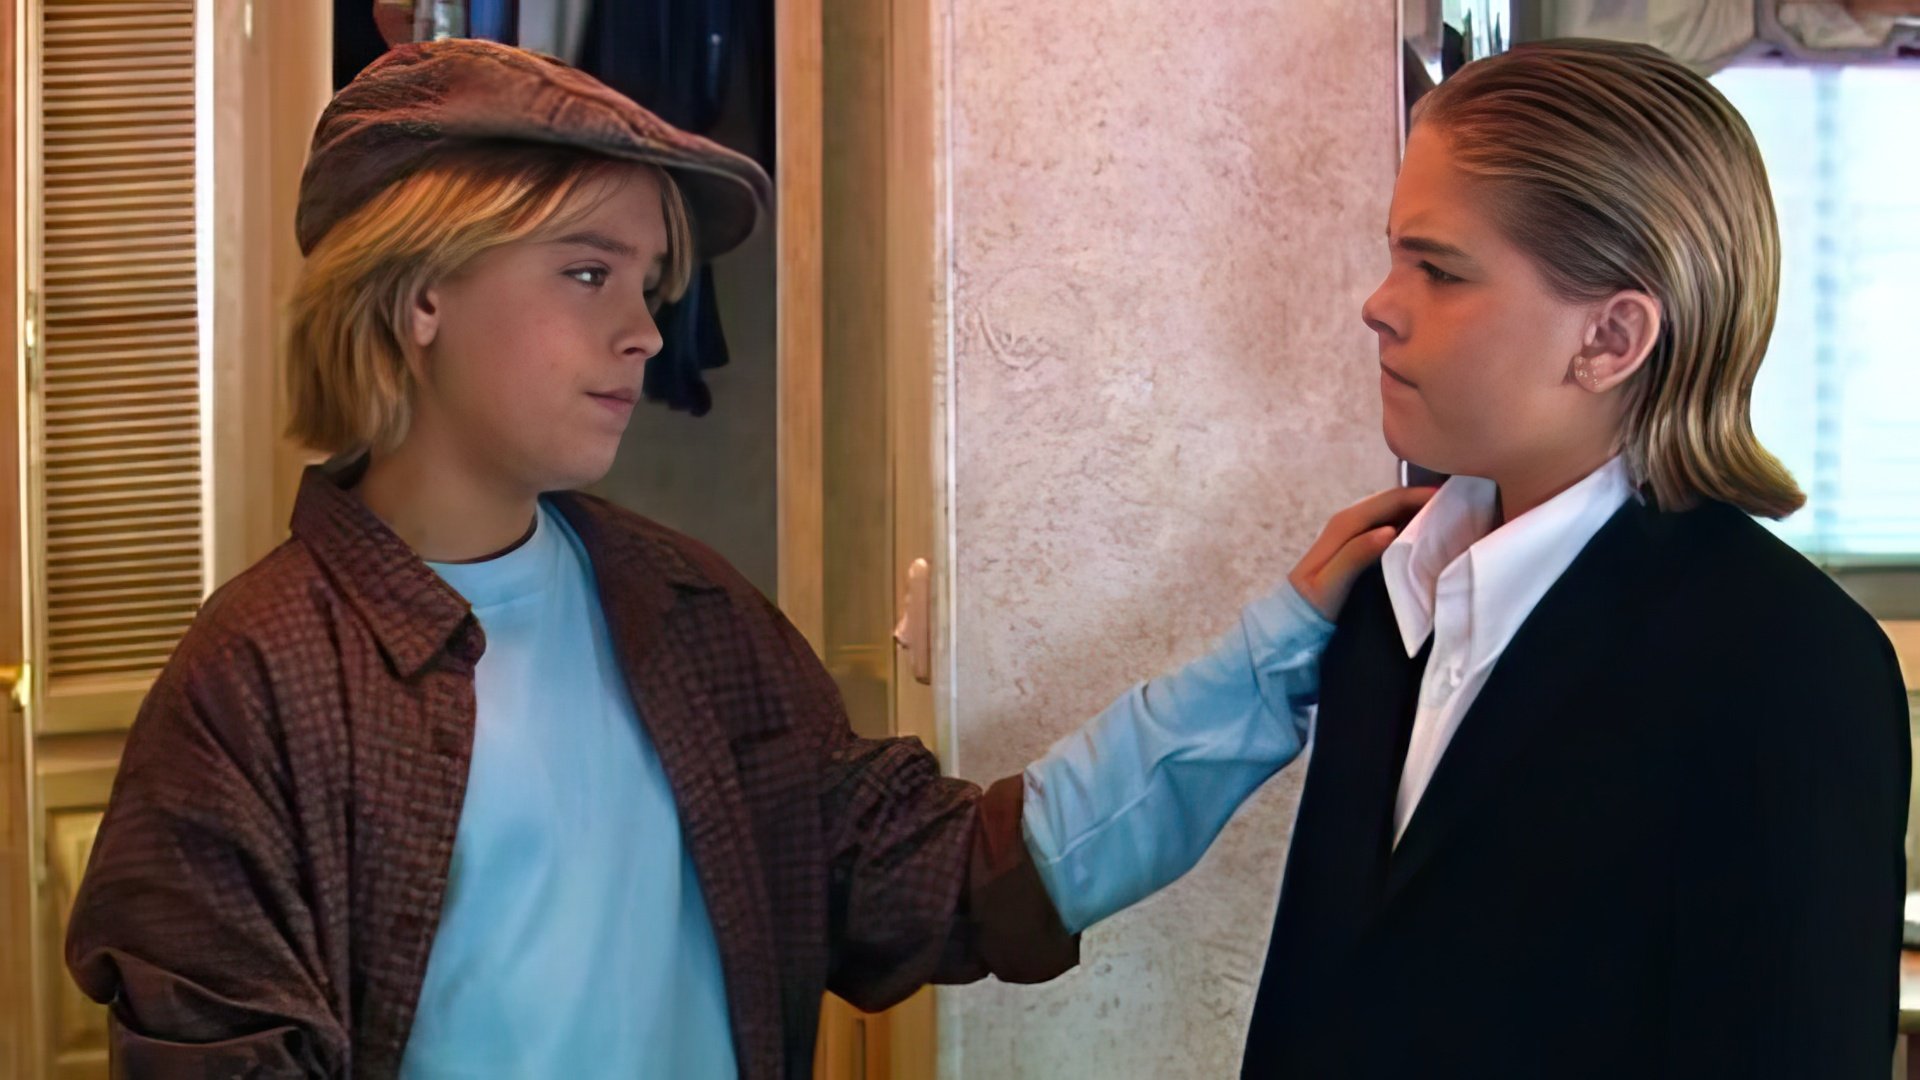 Dylan and Cole Sprouse in ‘A Modern Twain Story: The Prince and the Pauper